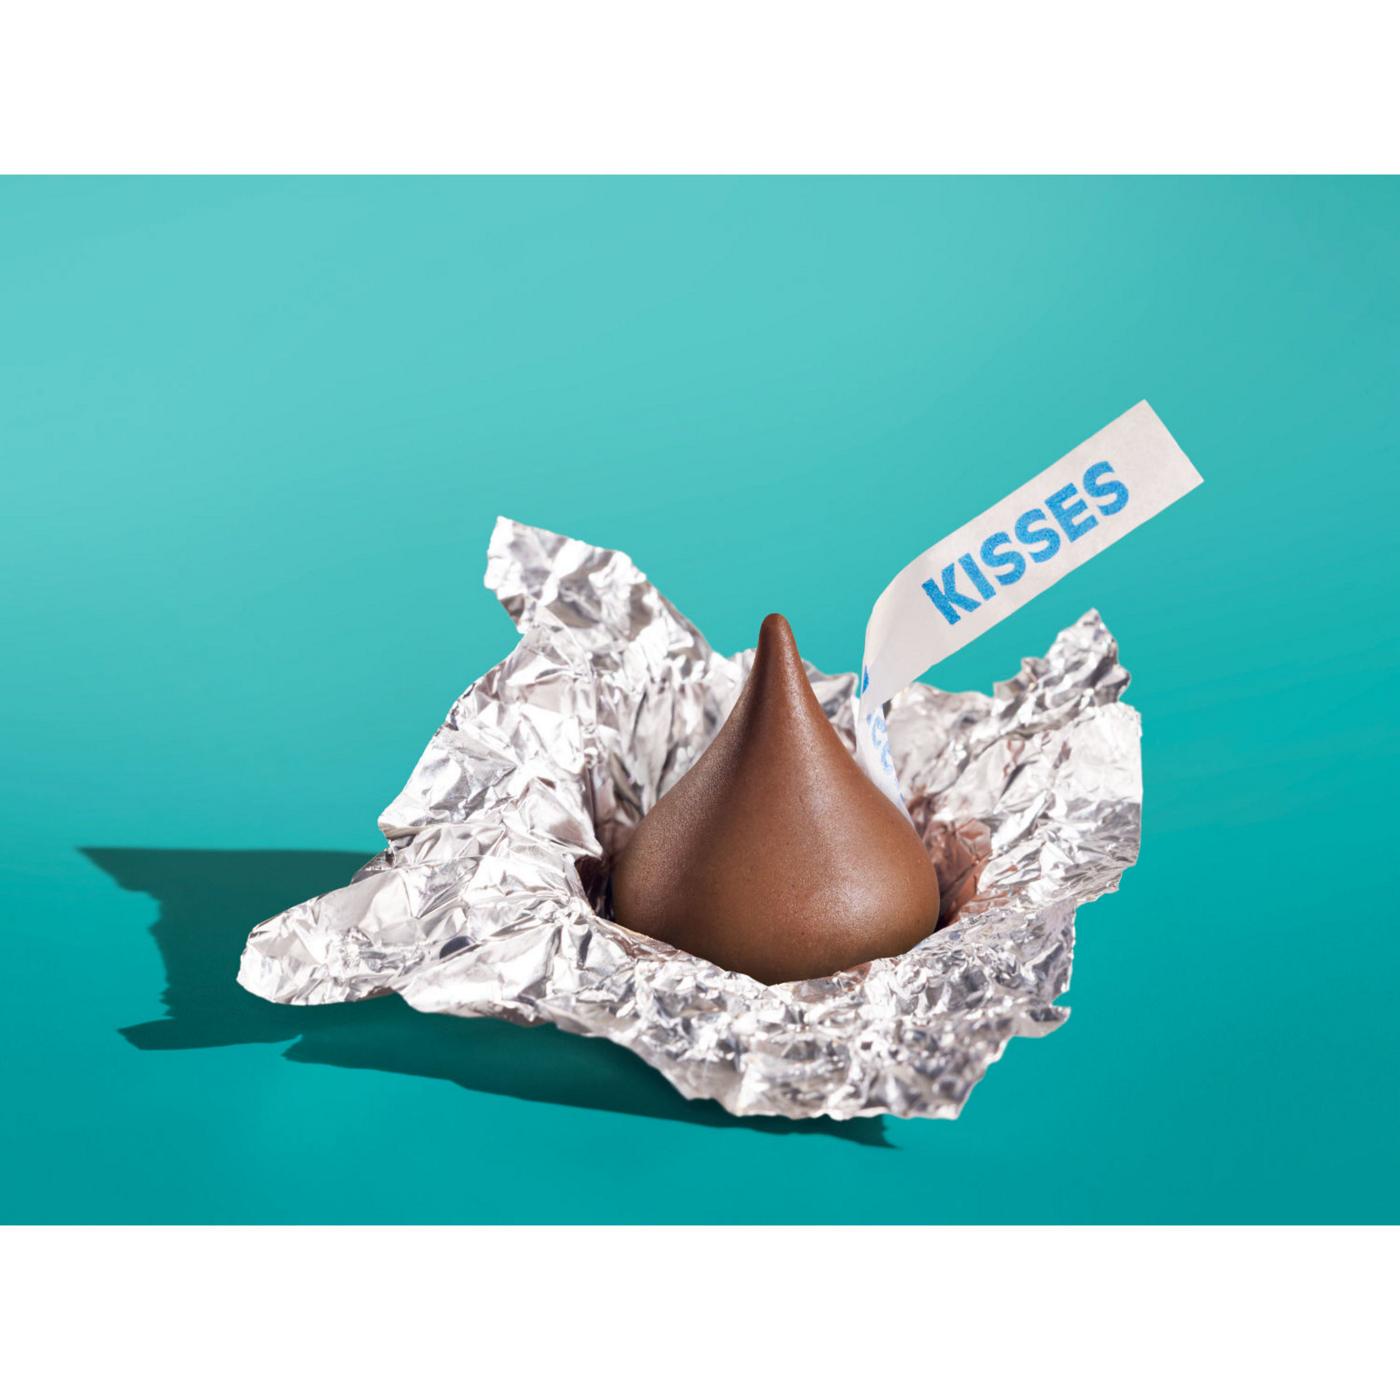 Hershey's Kisses Milk Chocolate Candy - Party Pack; image 2 of 7